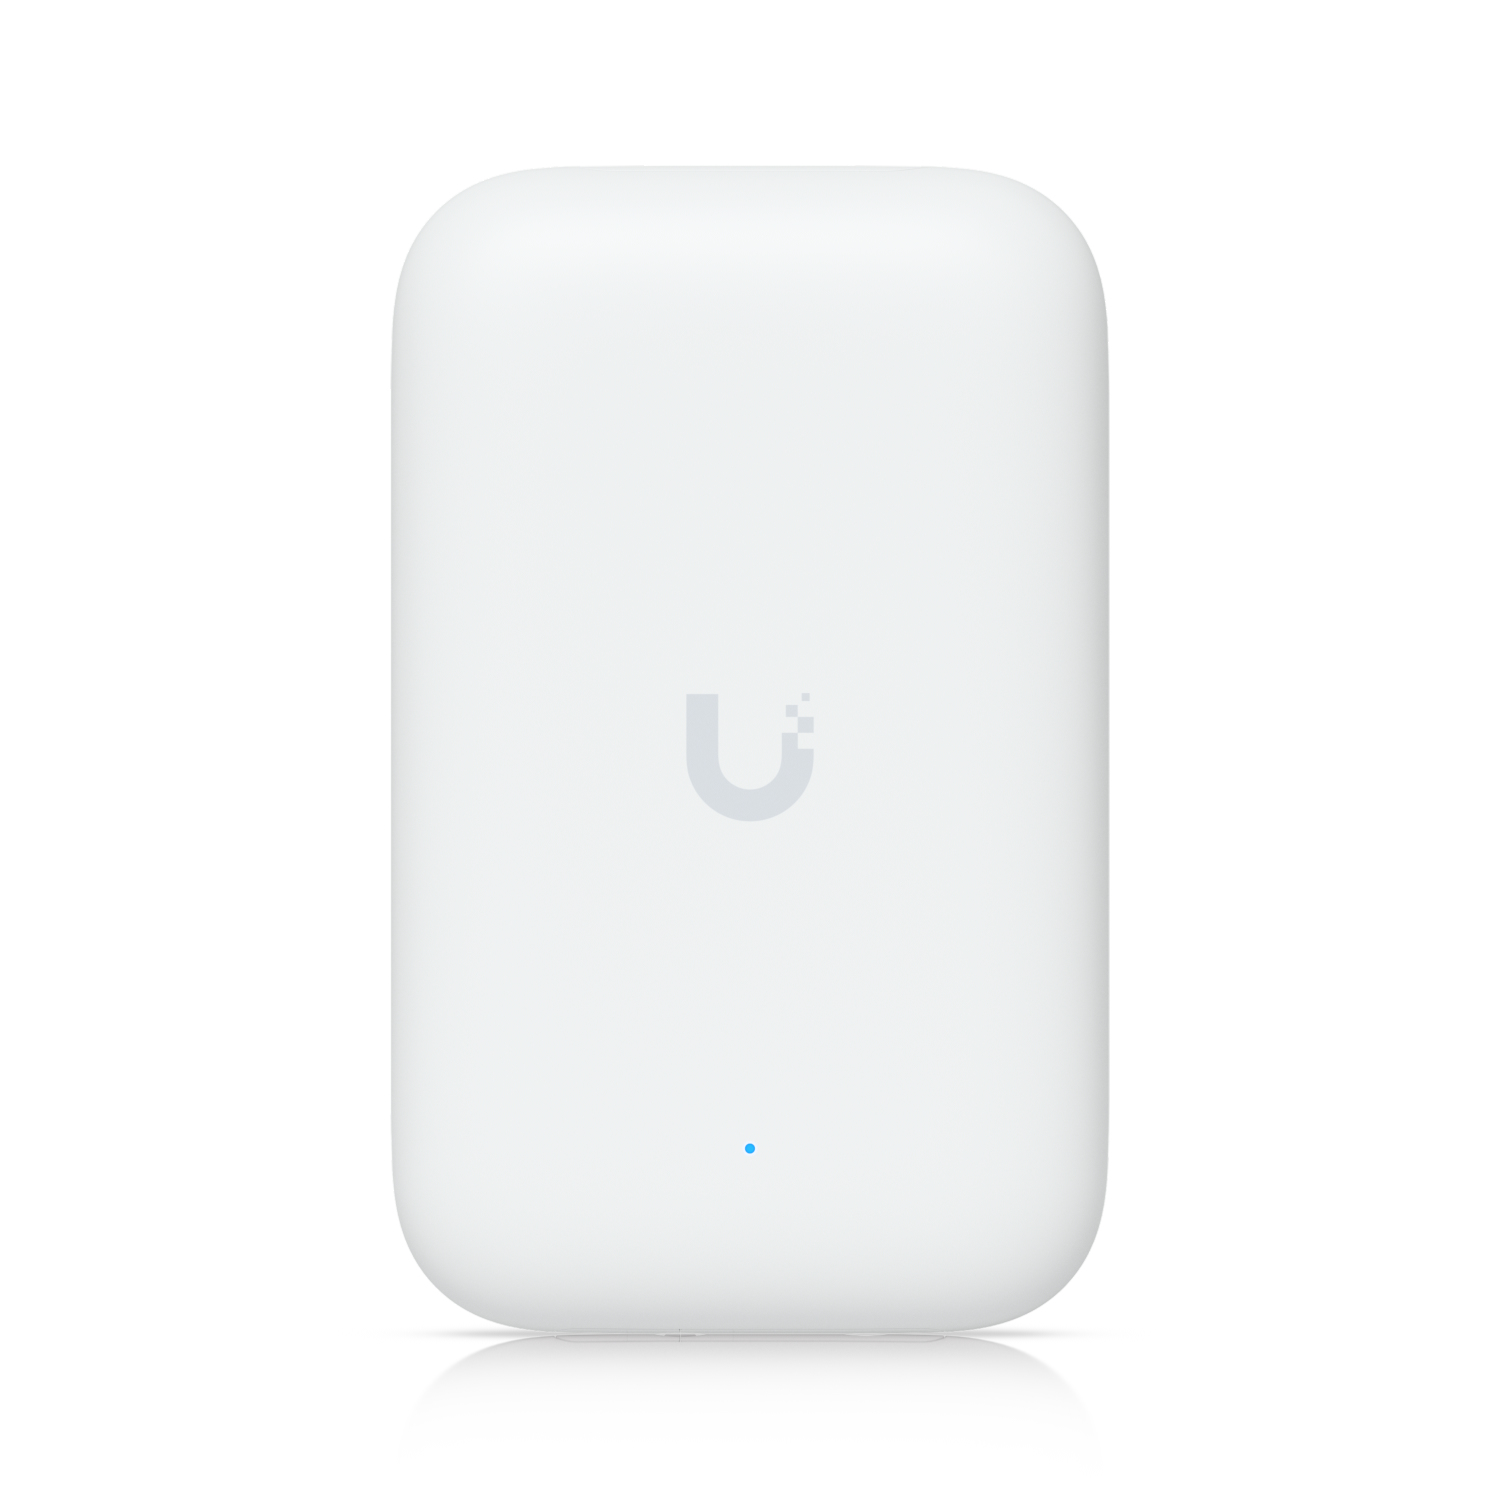 UK-ULTRA UBIQUITI NETWORKS Incredibly compact